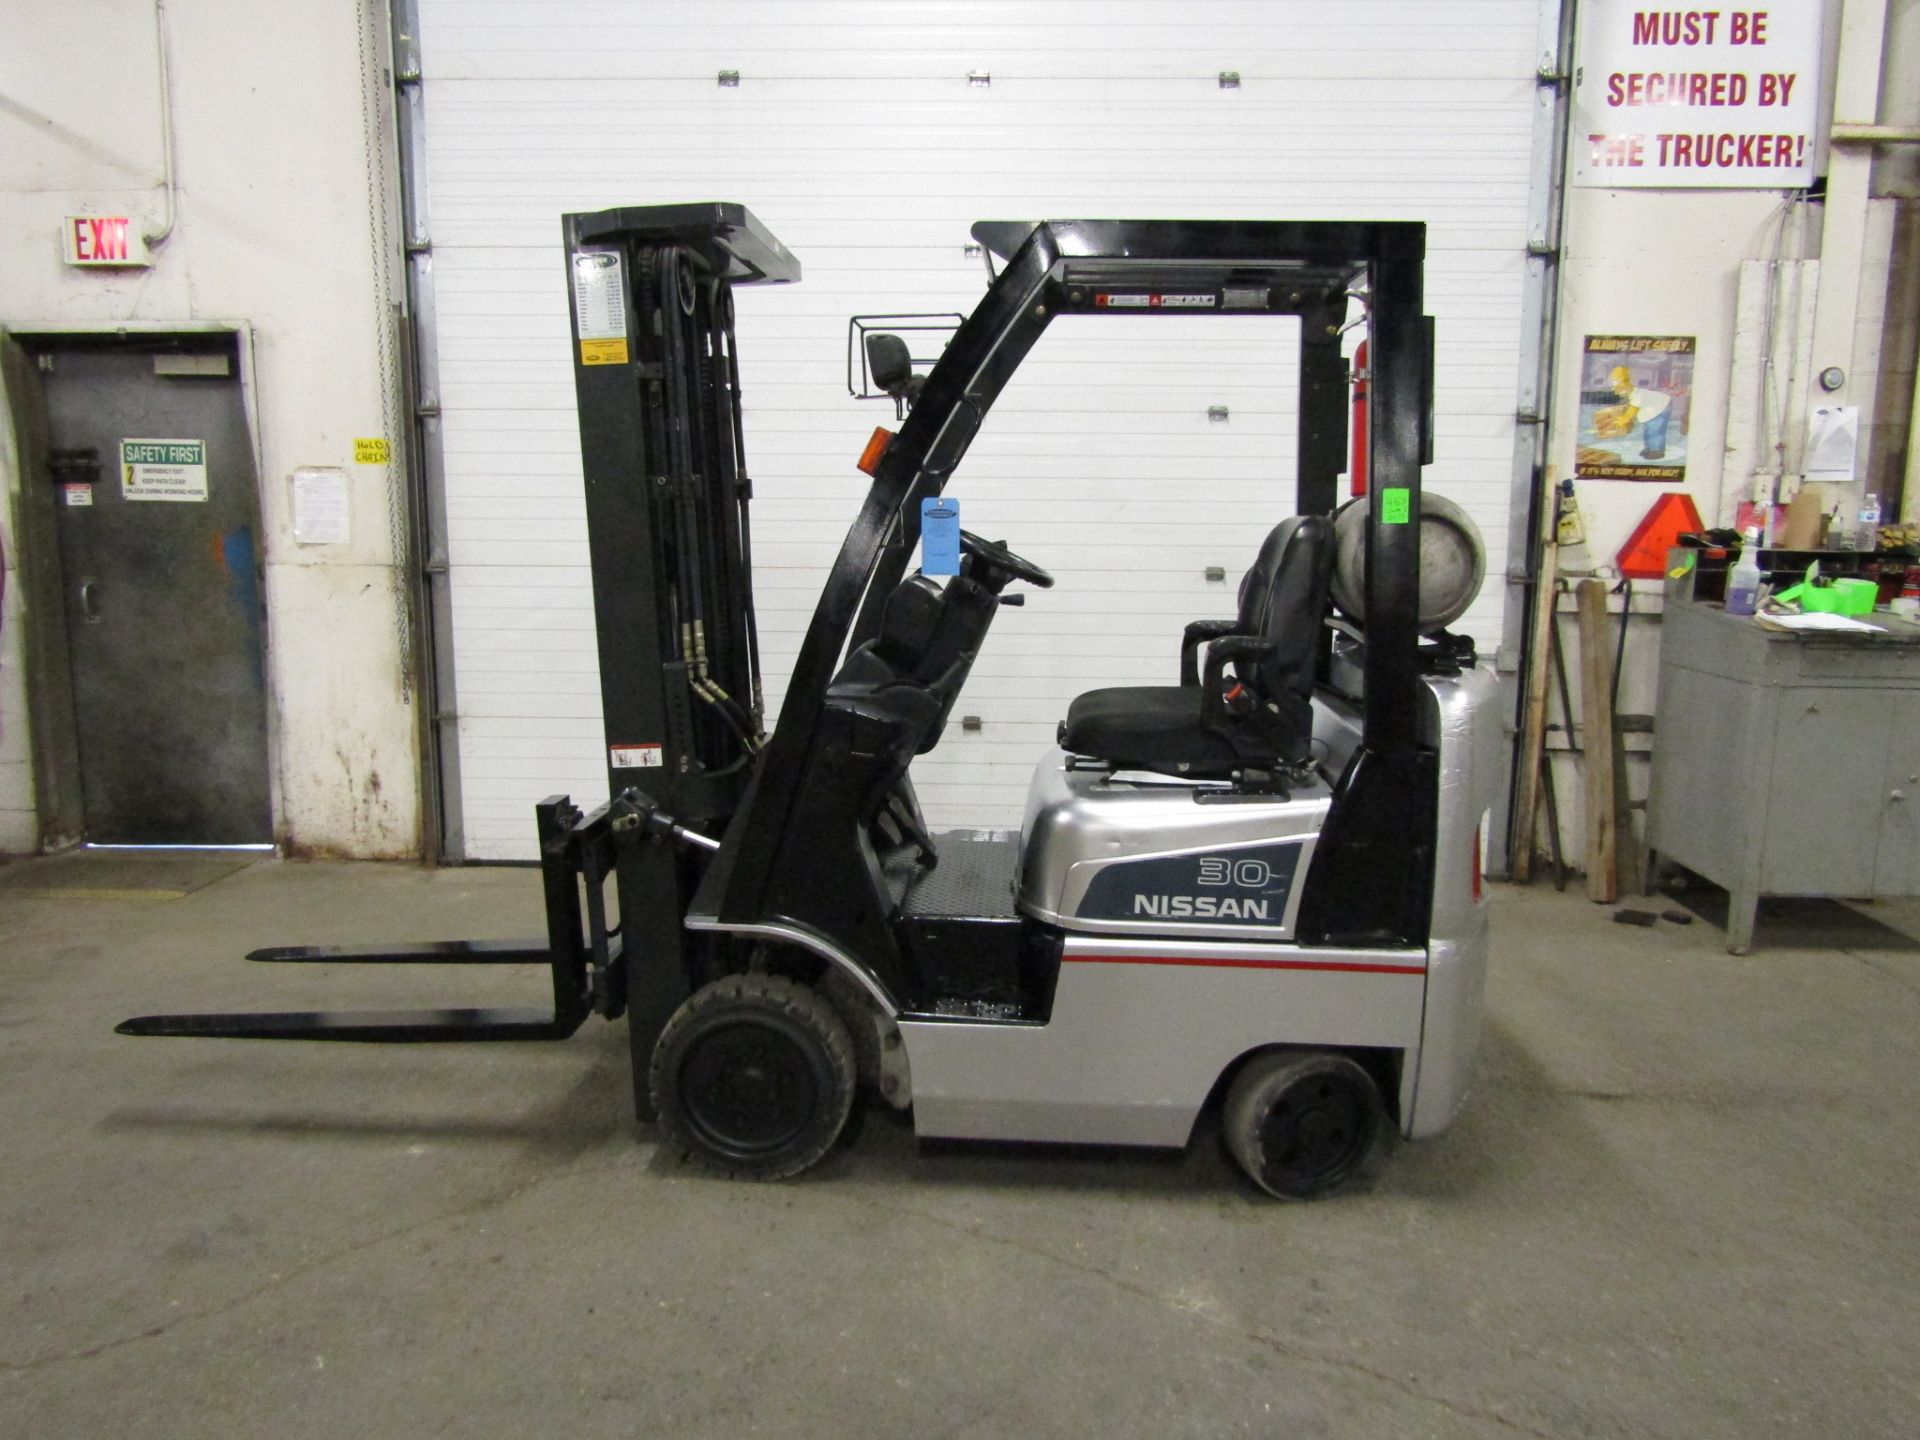 Nissan 3000lbs Capacity Forklift with 3-stage mast and sideshift - LPG (propane) (no propane tank